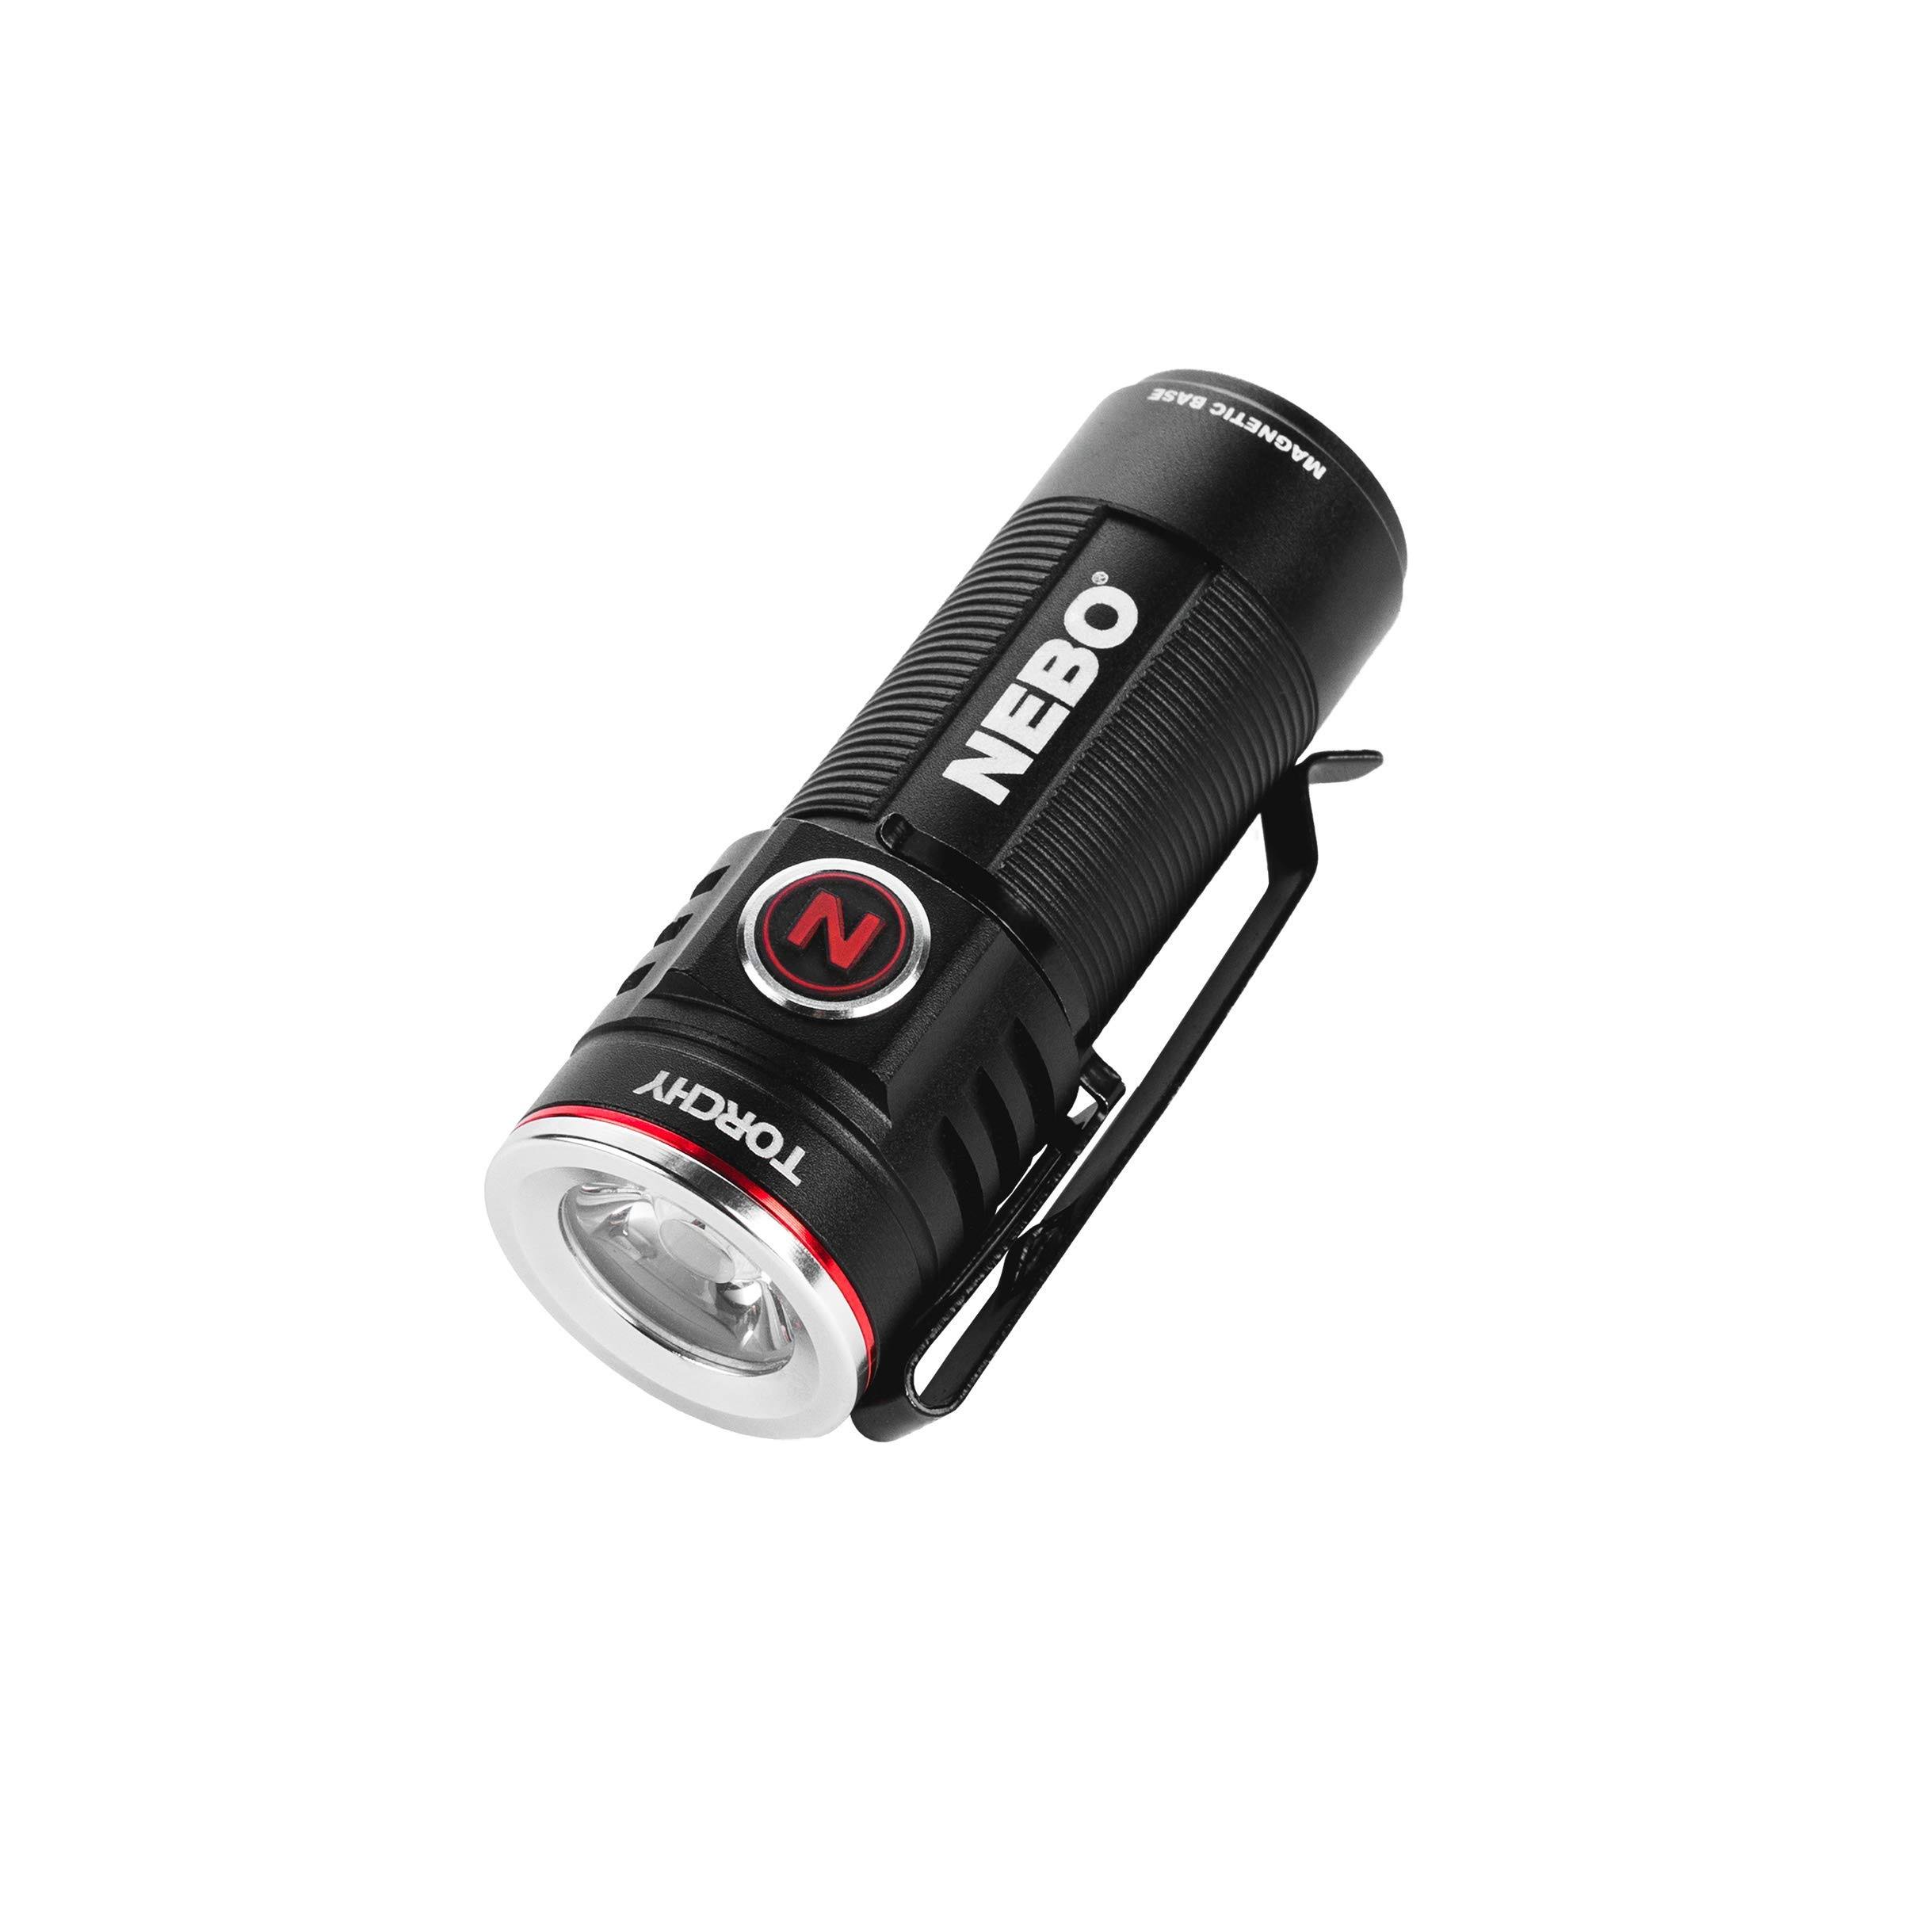 Nebo 1000-Lumen Pocket Sized Flashlight: 4 Light Modes Plus Turbo Mode; Water and Impact Resistant; Power Memory Recall; Rechargeable Batter